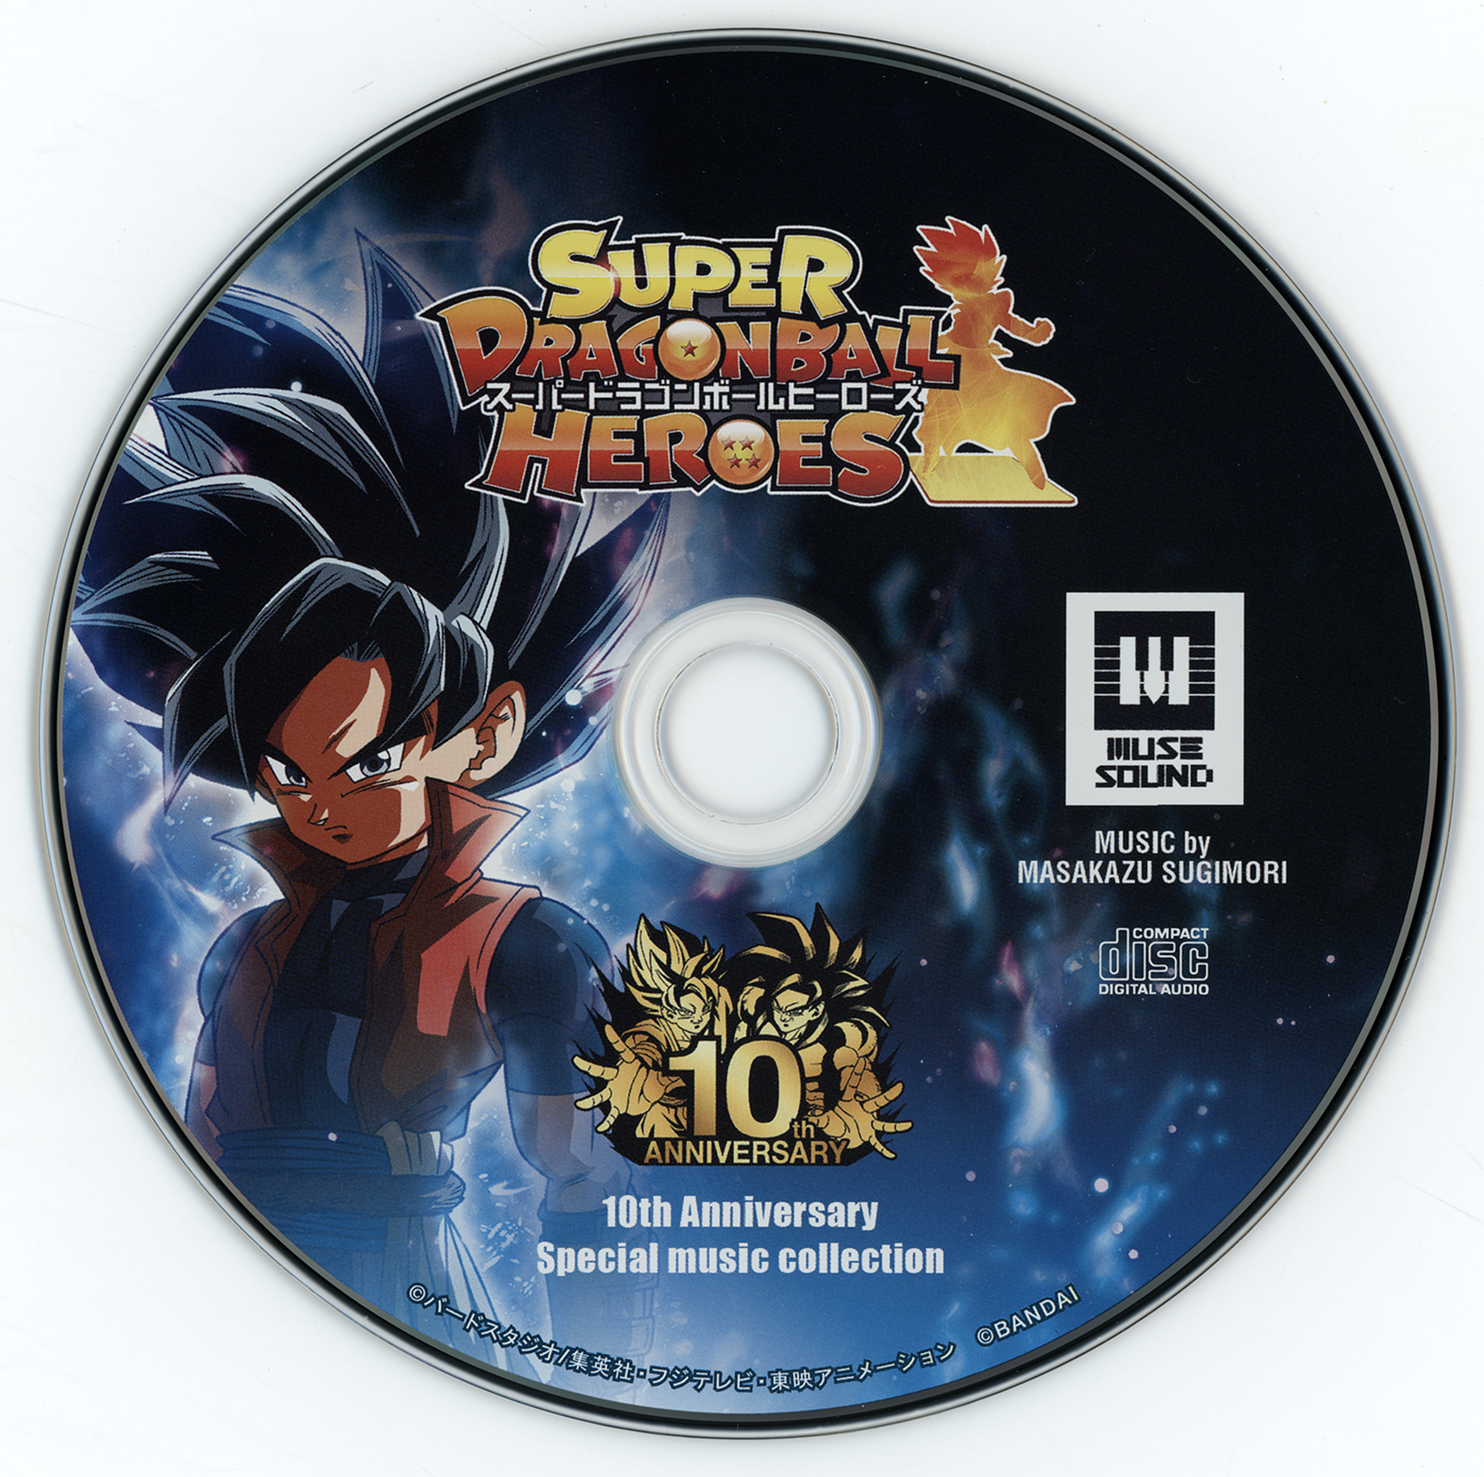 SUPER DRAGONBALL HEROES 10th Anniversary Special music collection